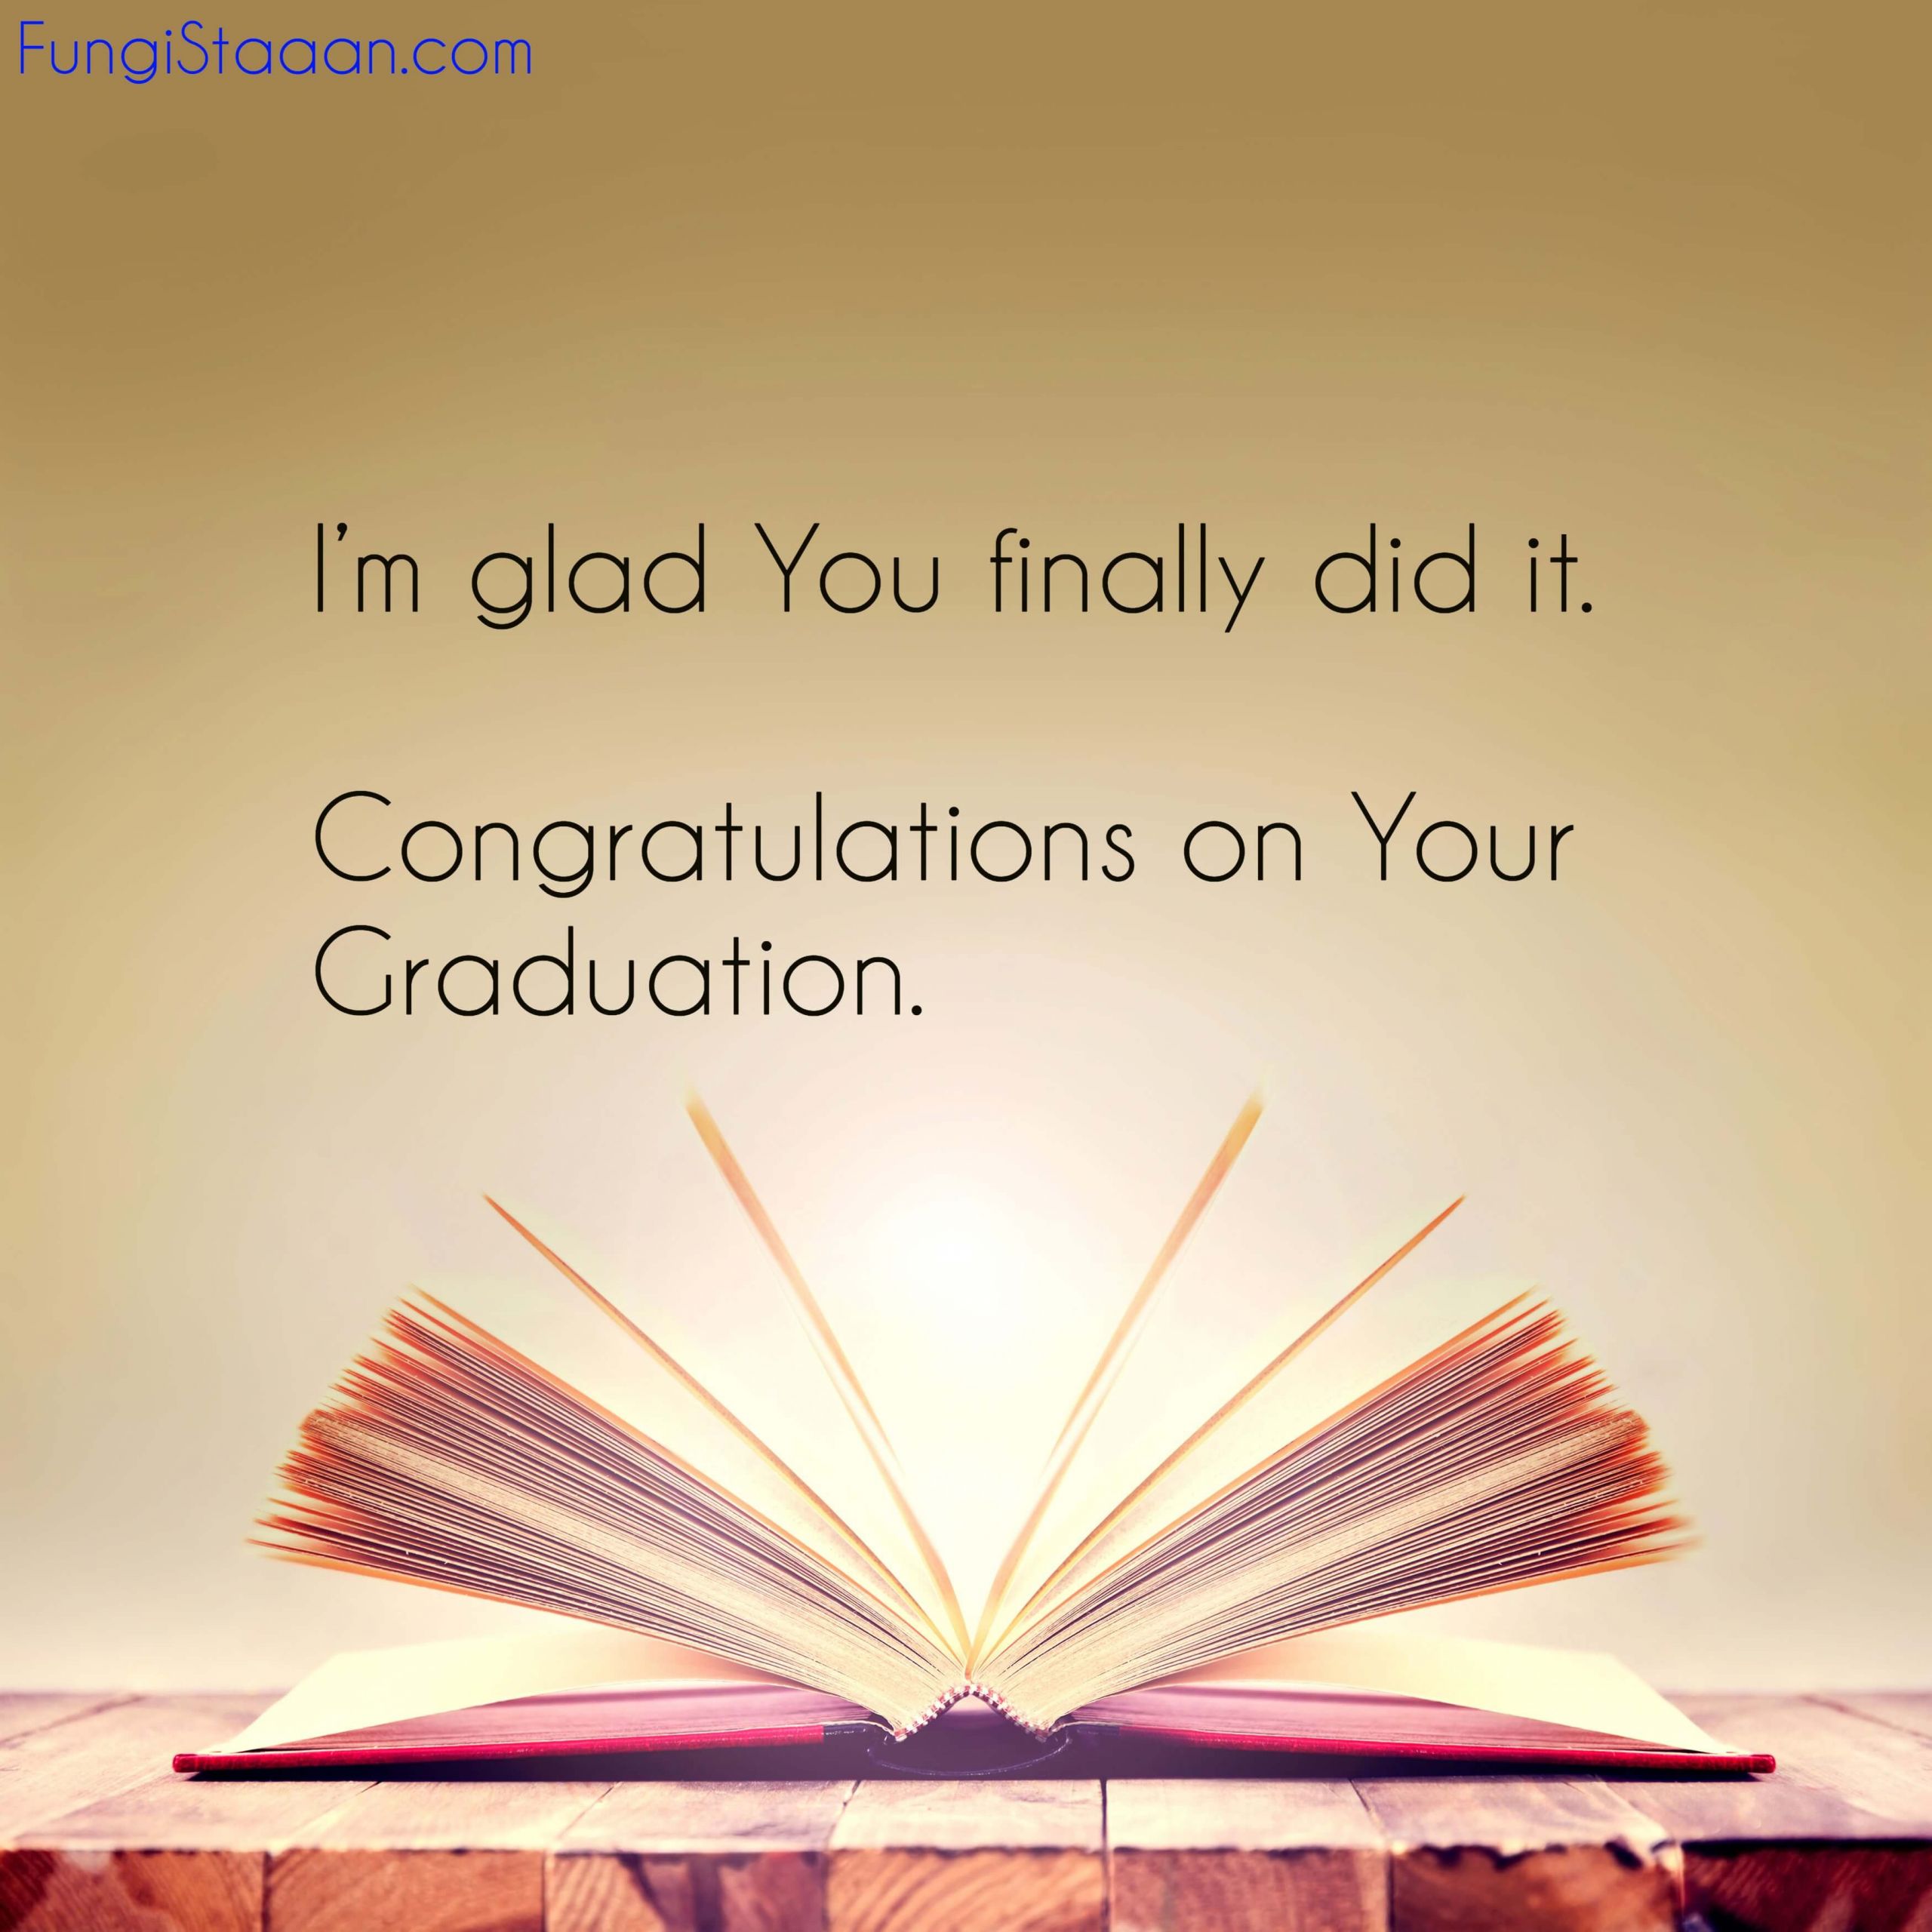 Graduation Blessings Quotes
 TOP 200 Best Graduation Wishes Quotes Messages